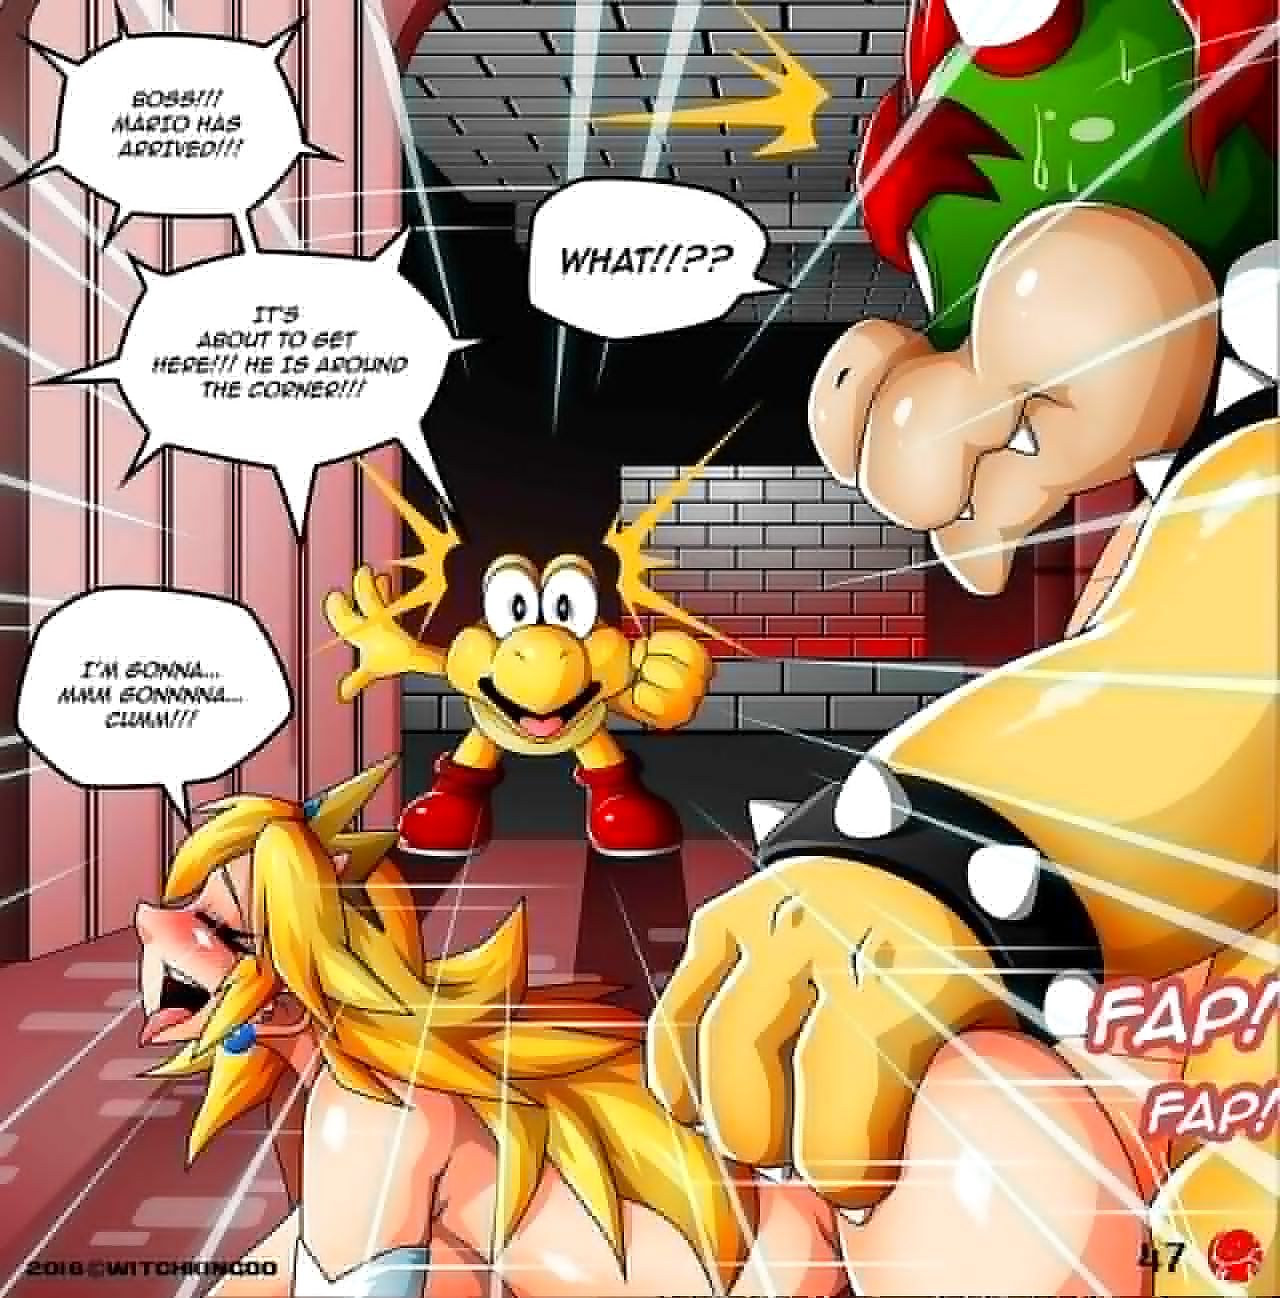 Uphold pending Me Mario! Be imparted to murder Prequel - faithfulness 3